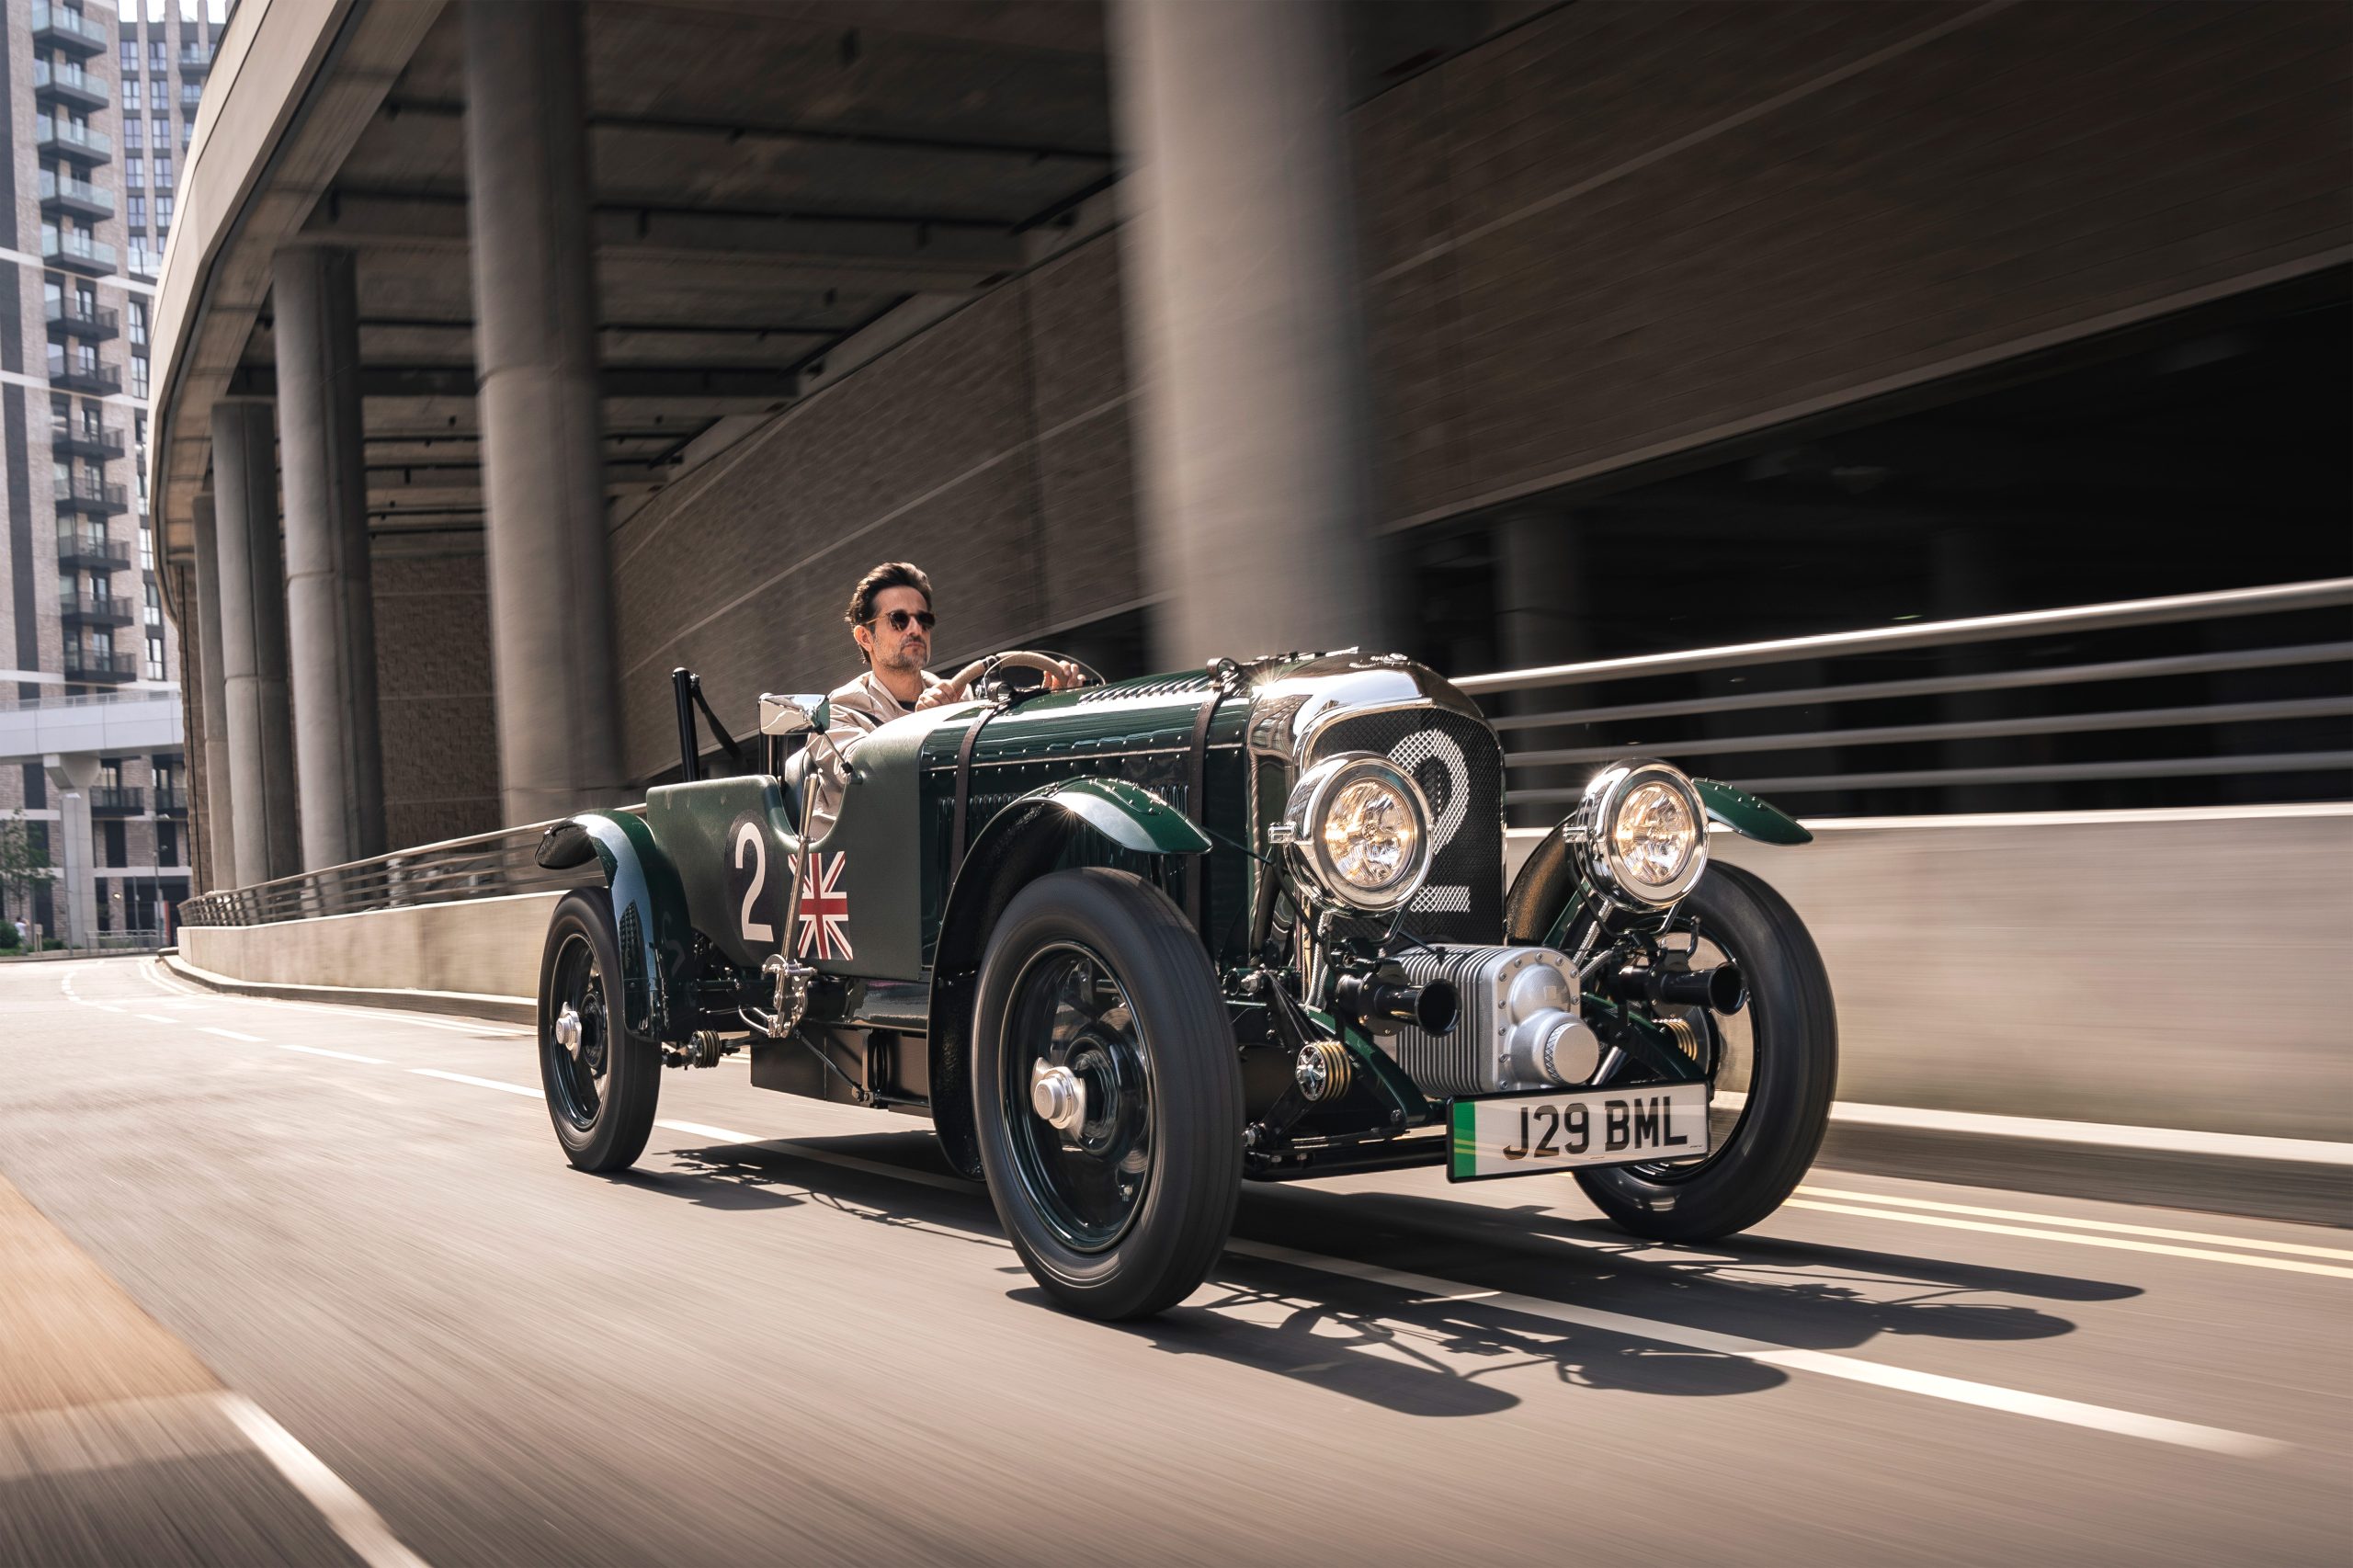 The Bentley Blower has been reborn as an electric city car